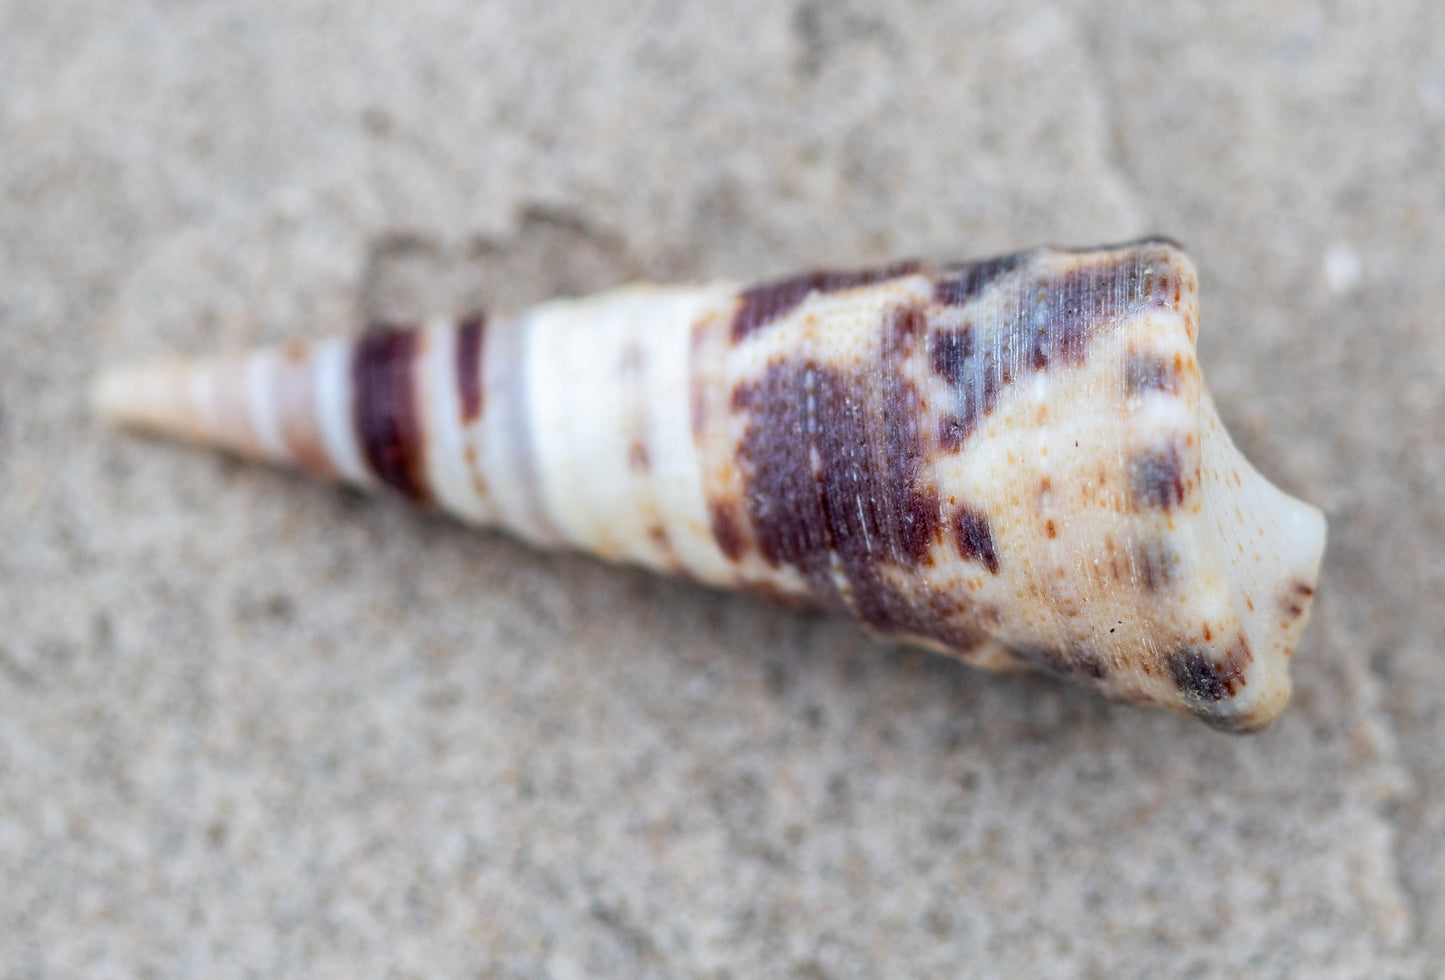 Sea Shell Photography: orange and white on sand.